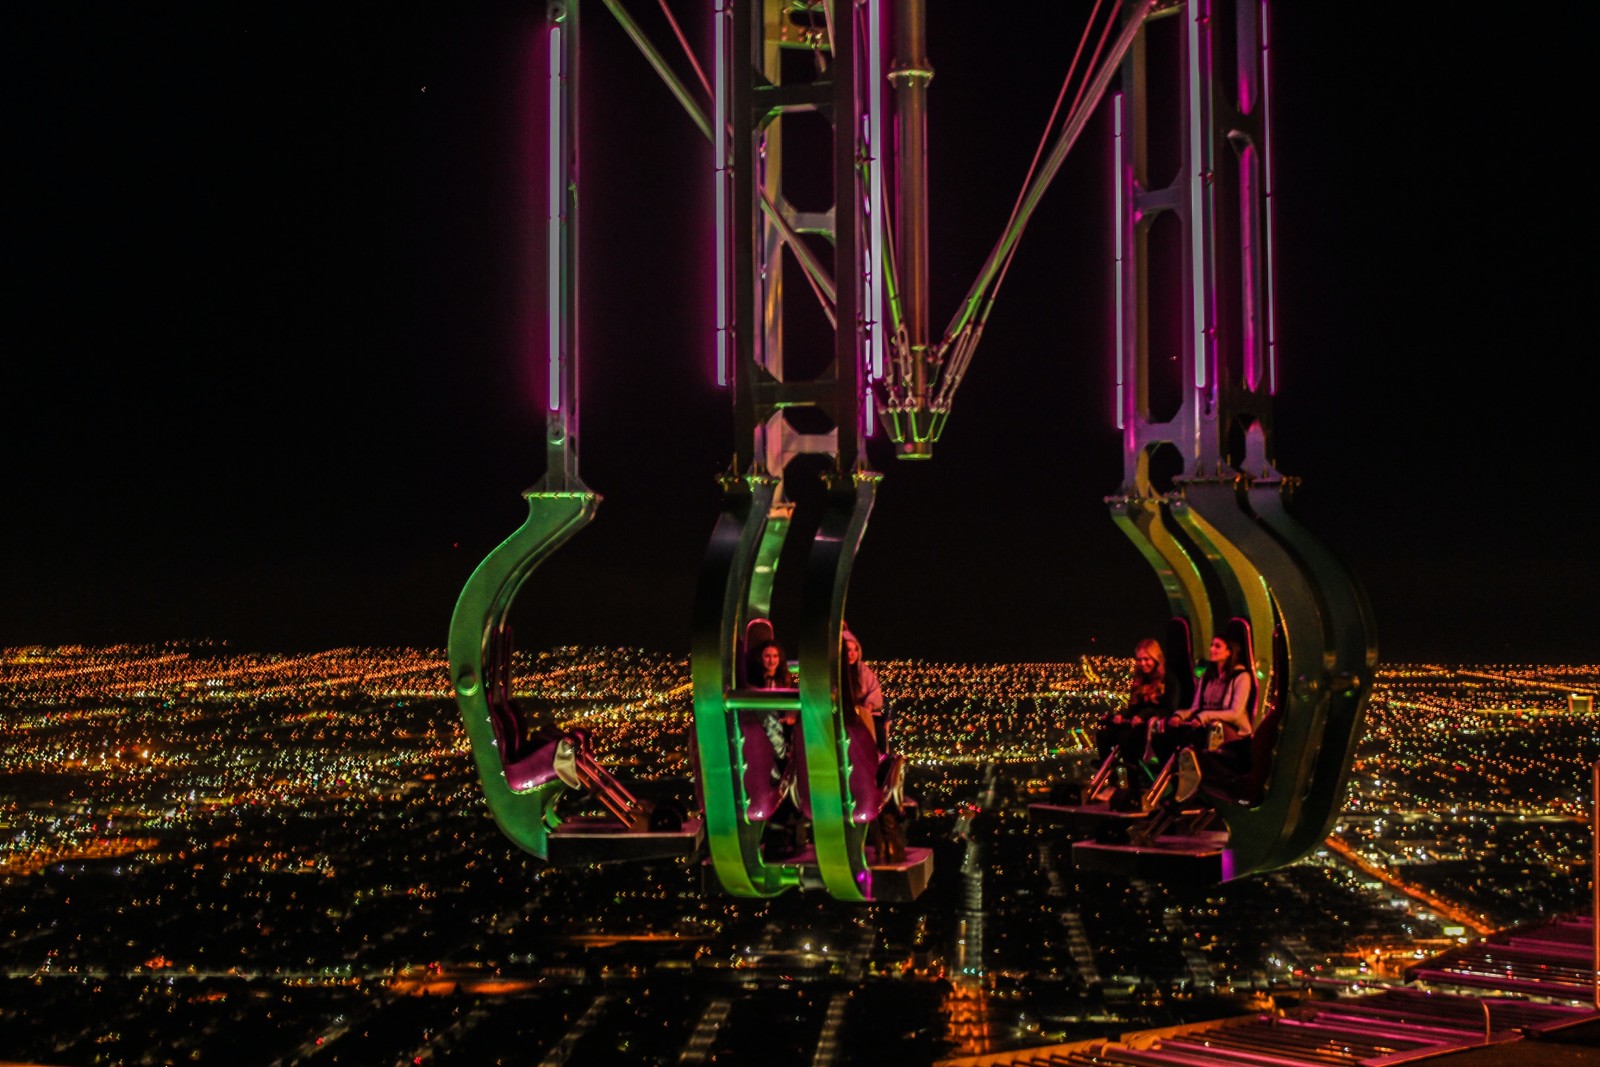 Las Vegas amusement park with people suspended in the air. 